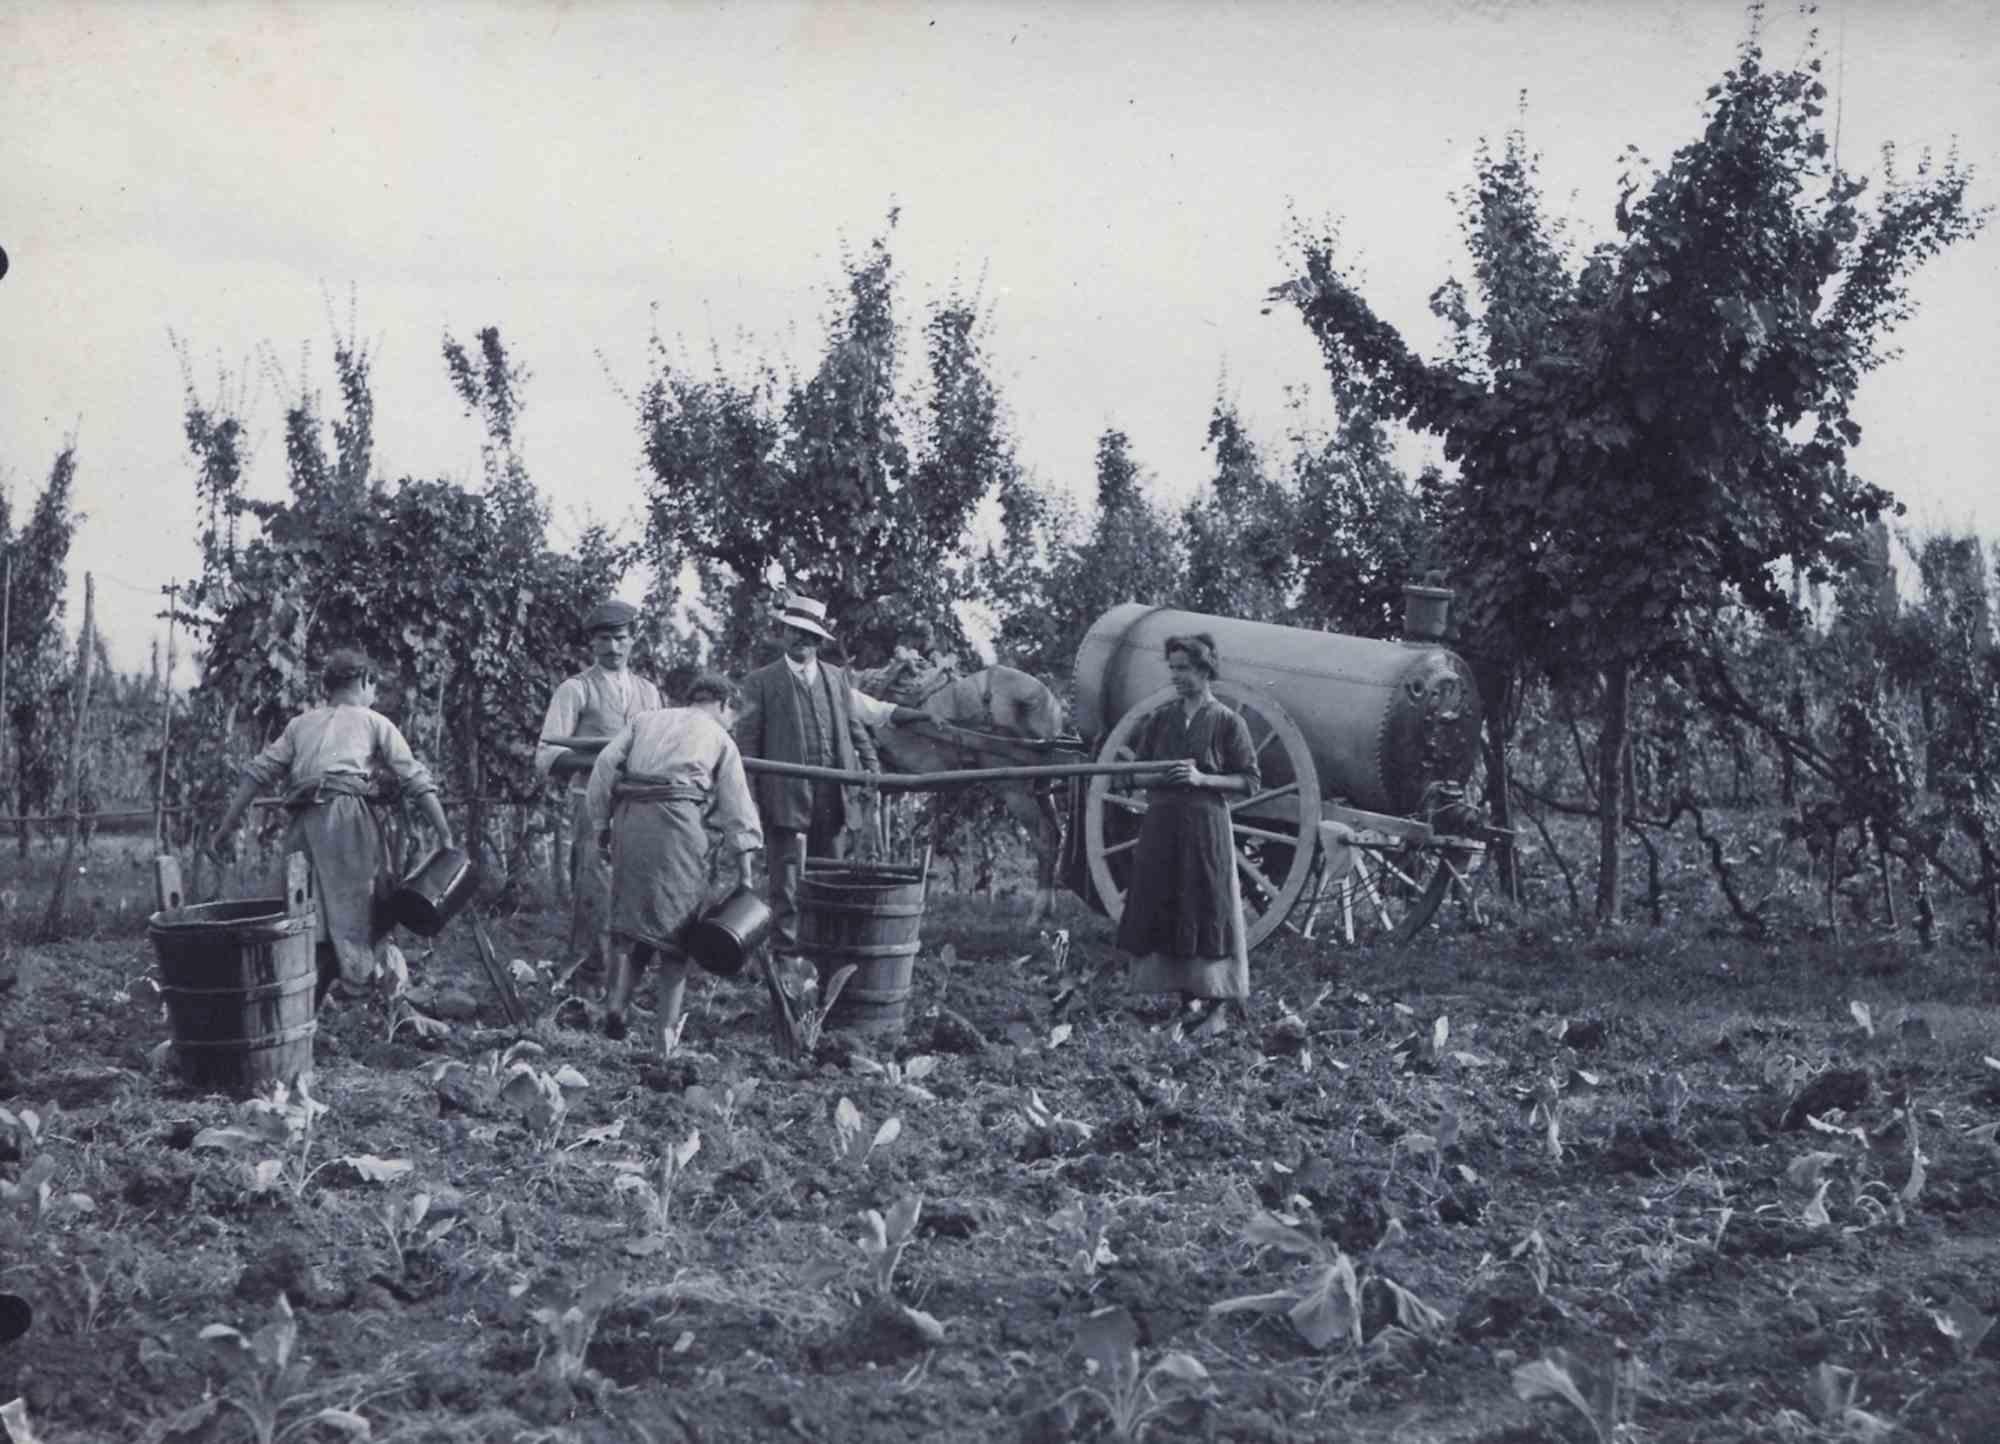 Unknown Figurative Photograph - Old Days Photo - Farmers - Vintage Photo - Early 20th century